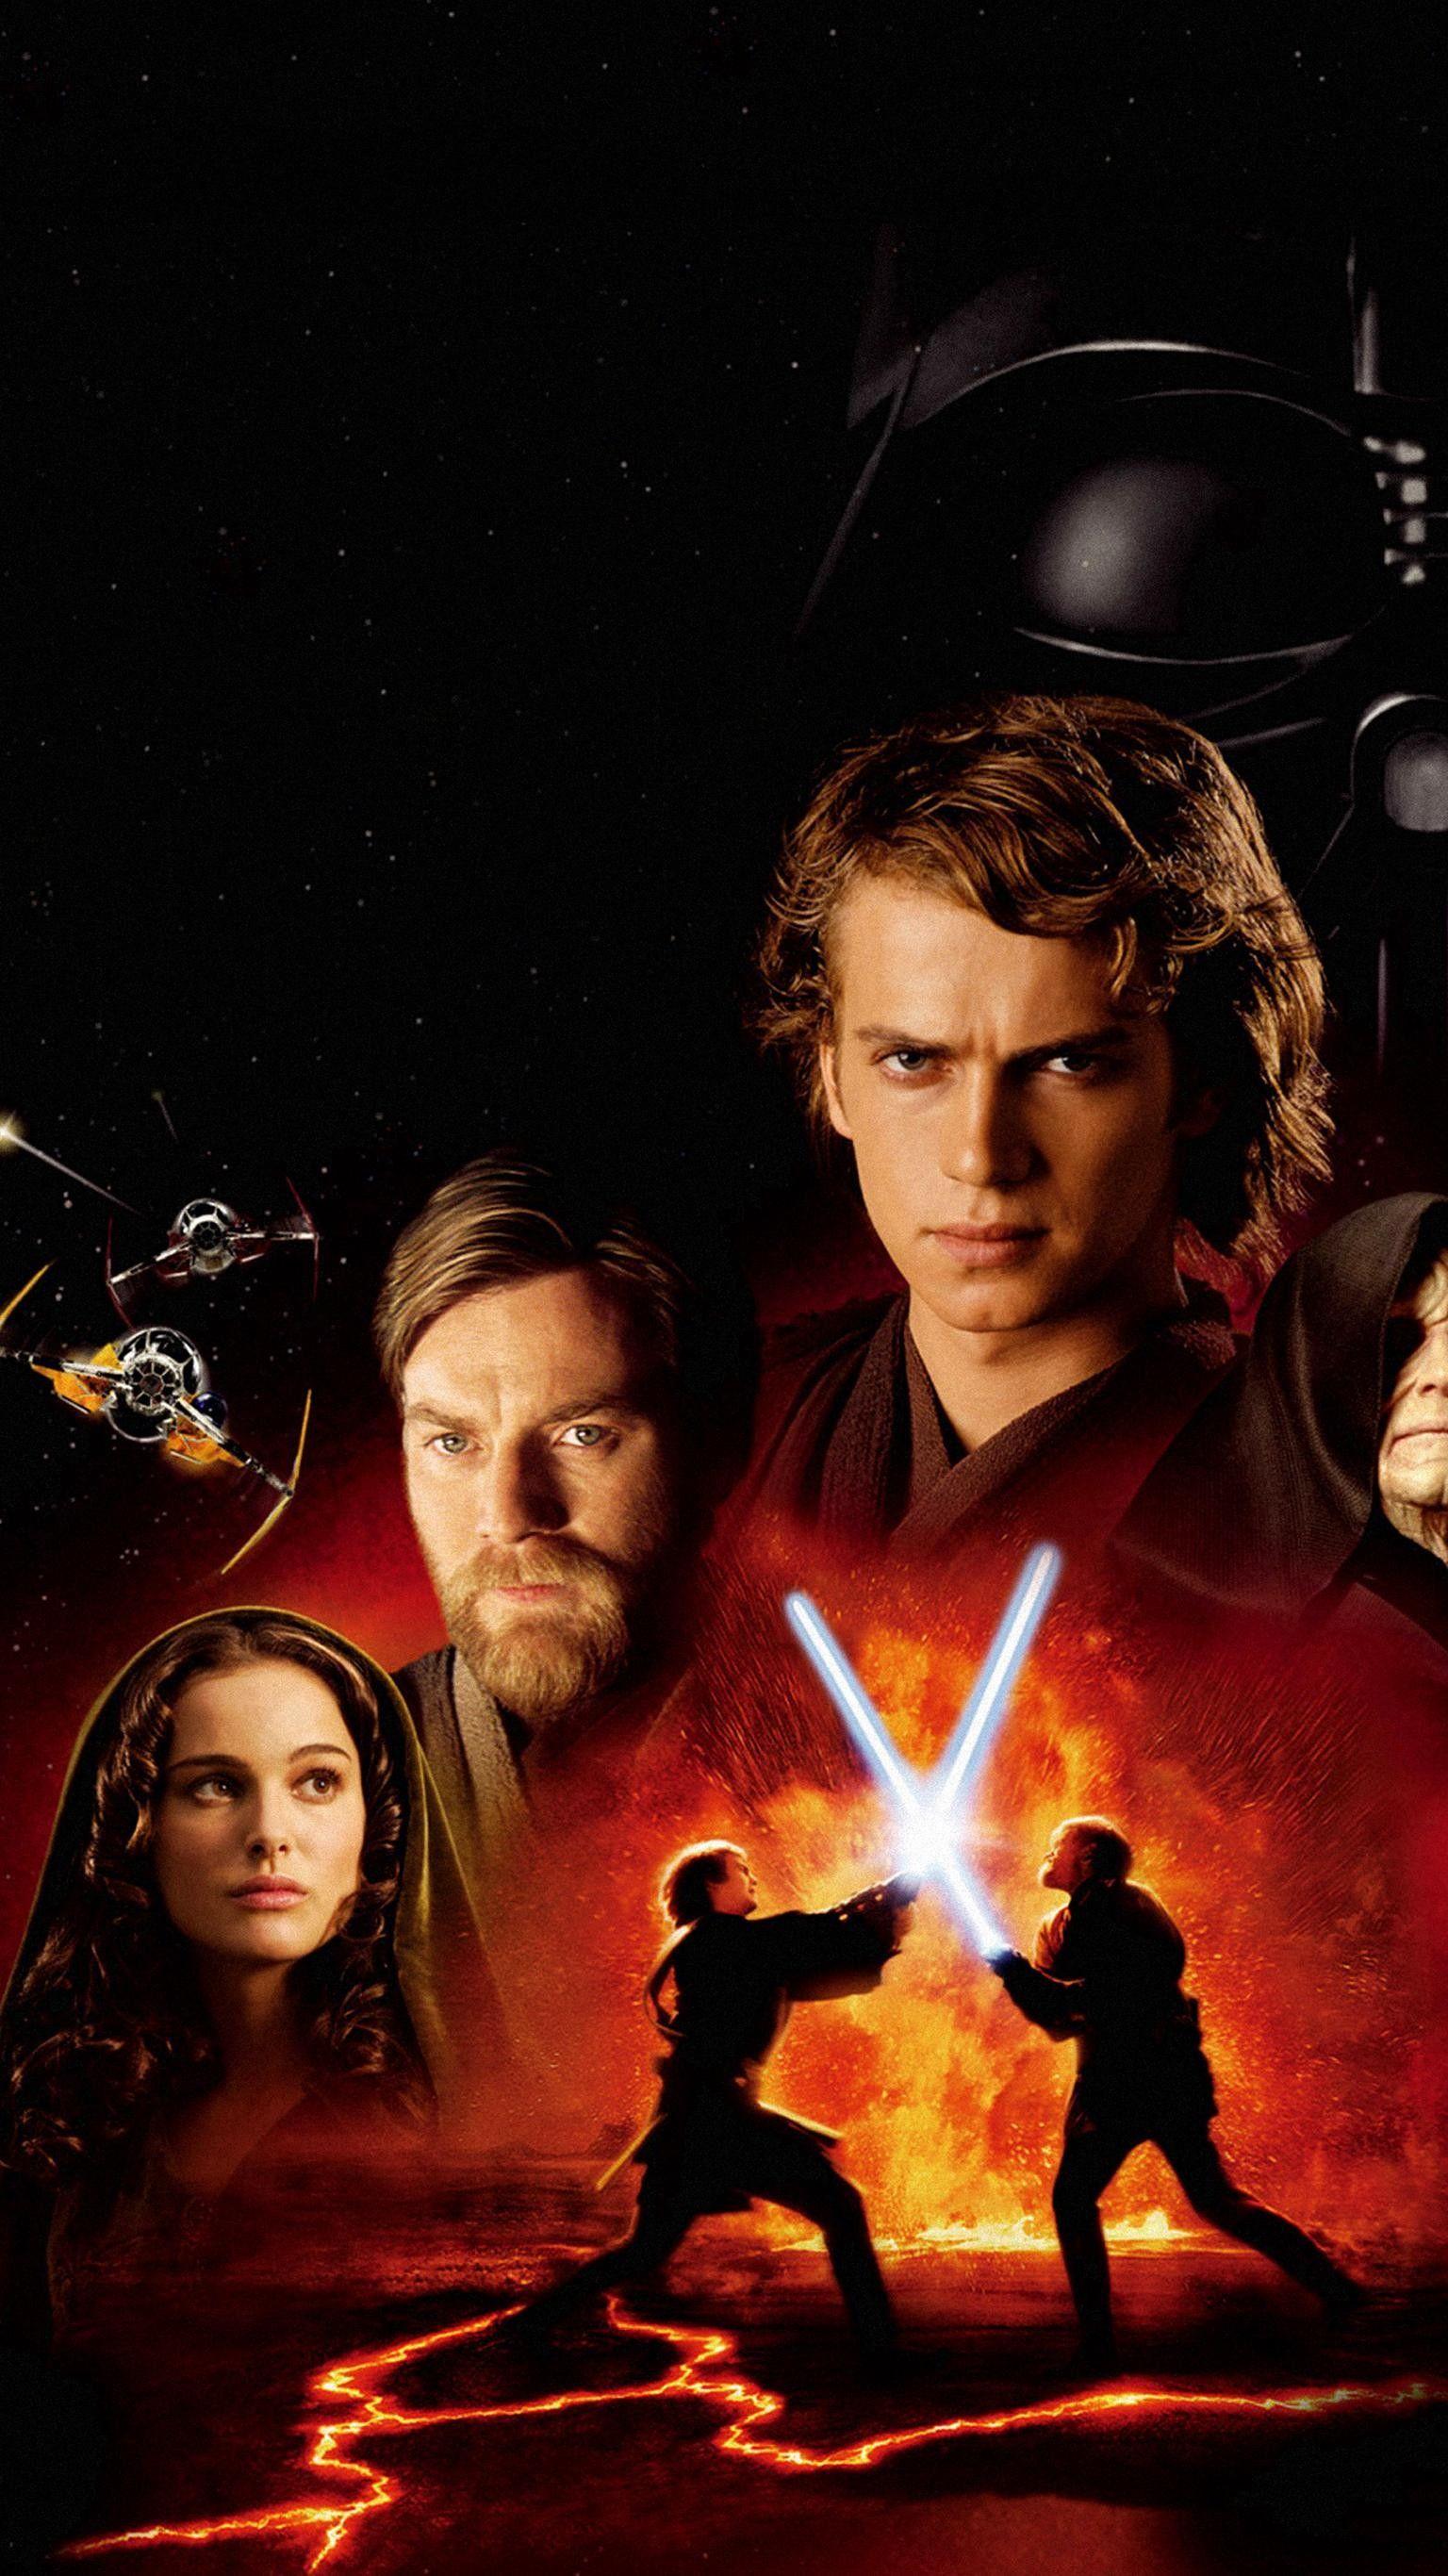 506018 star wars episode iii revenge of the sith  Full HD Photo 1920x1080   Rare Gallery HD Wallpapers